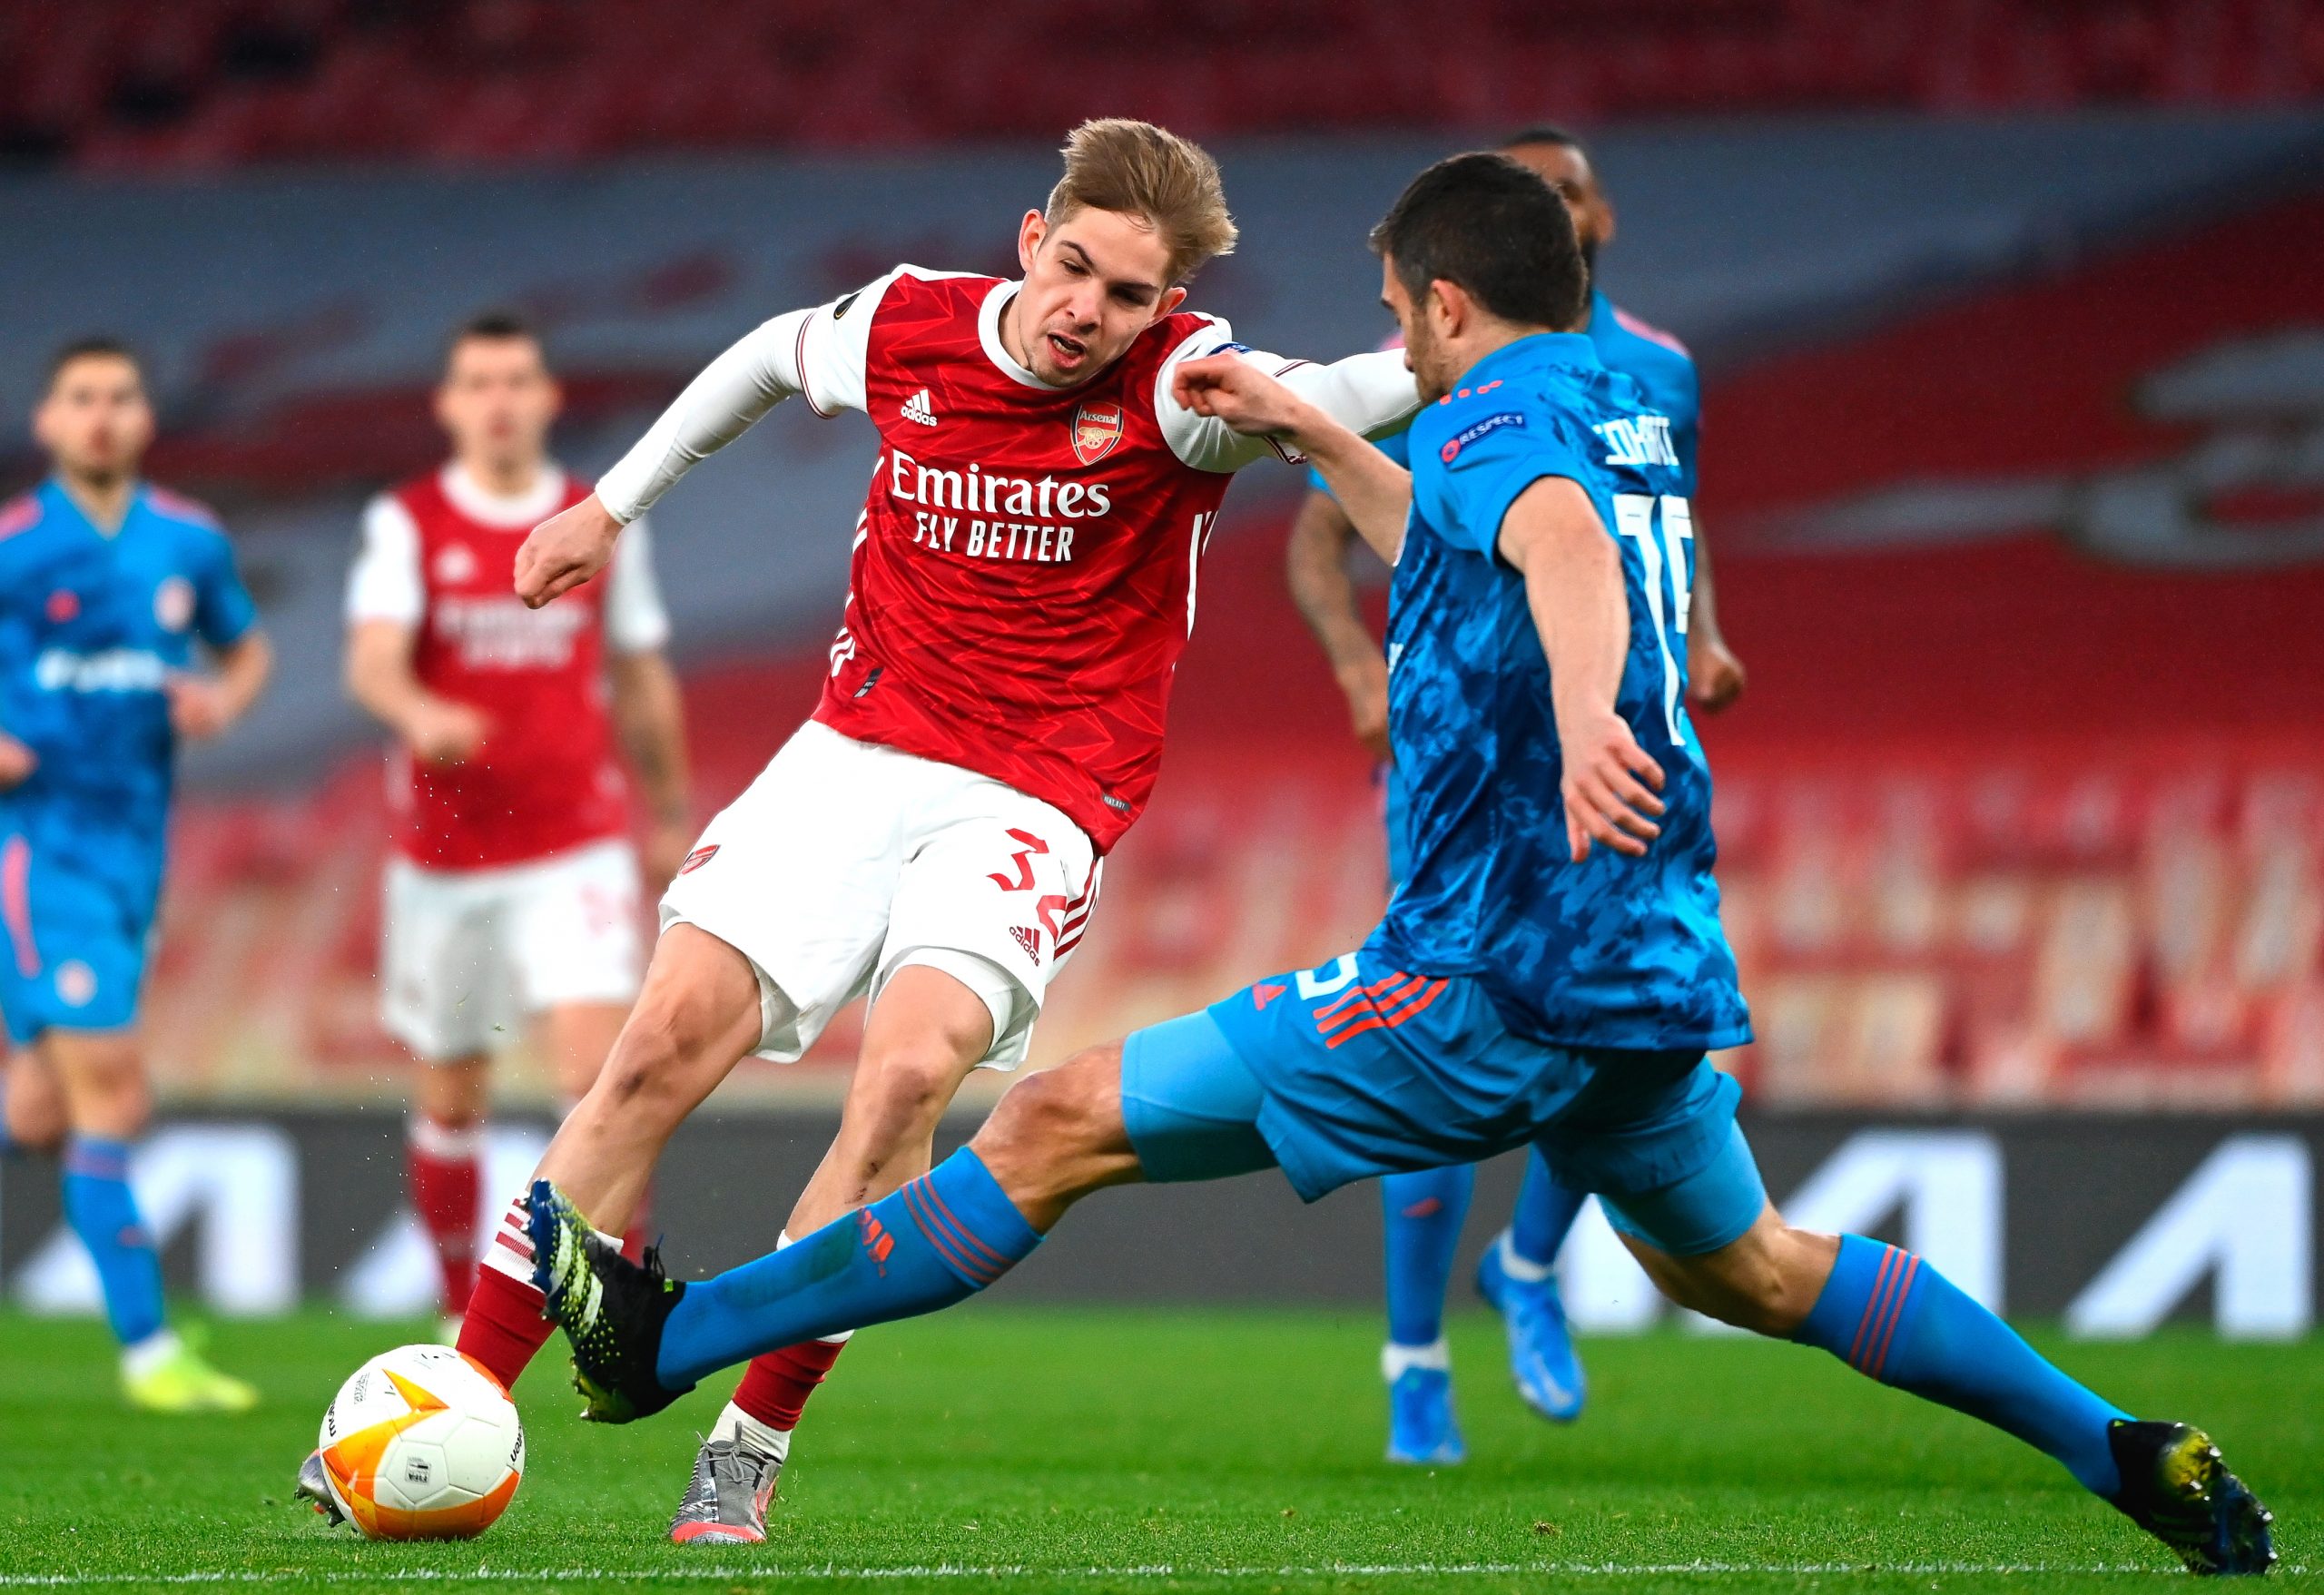 epa09082414 Arsenal's Emile Smith Rowe (L) in action against Olympiacos' Sokratis Papastathopoulos (R) during the UEFA Europa League round of 16, second leg soccer match between Arsenal FC and Olympiacos Piraeus in London, Britain, 18 March 2021.  EPA/ANDY RAIN